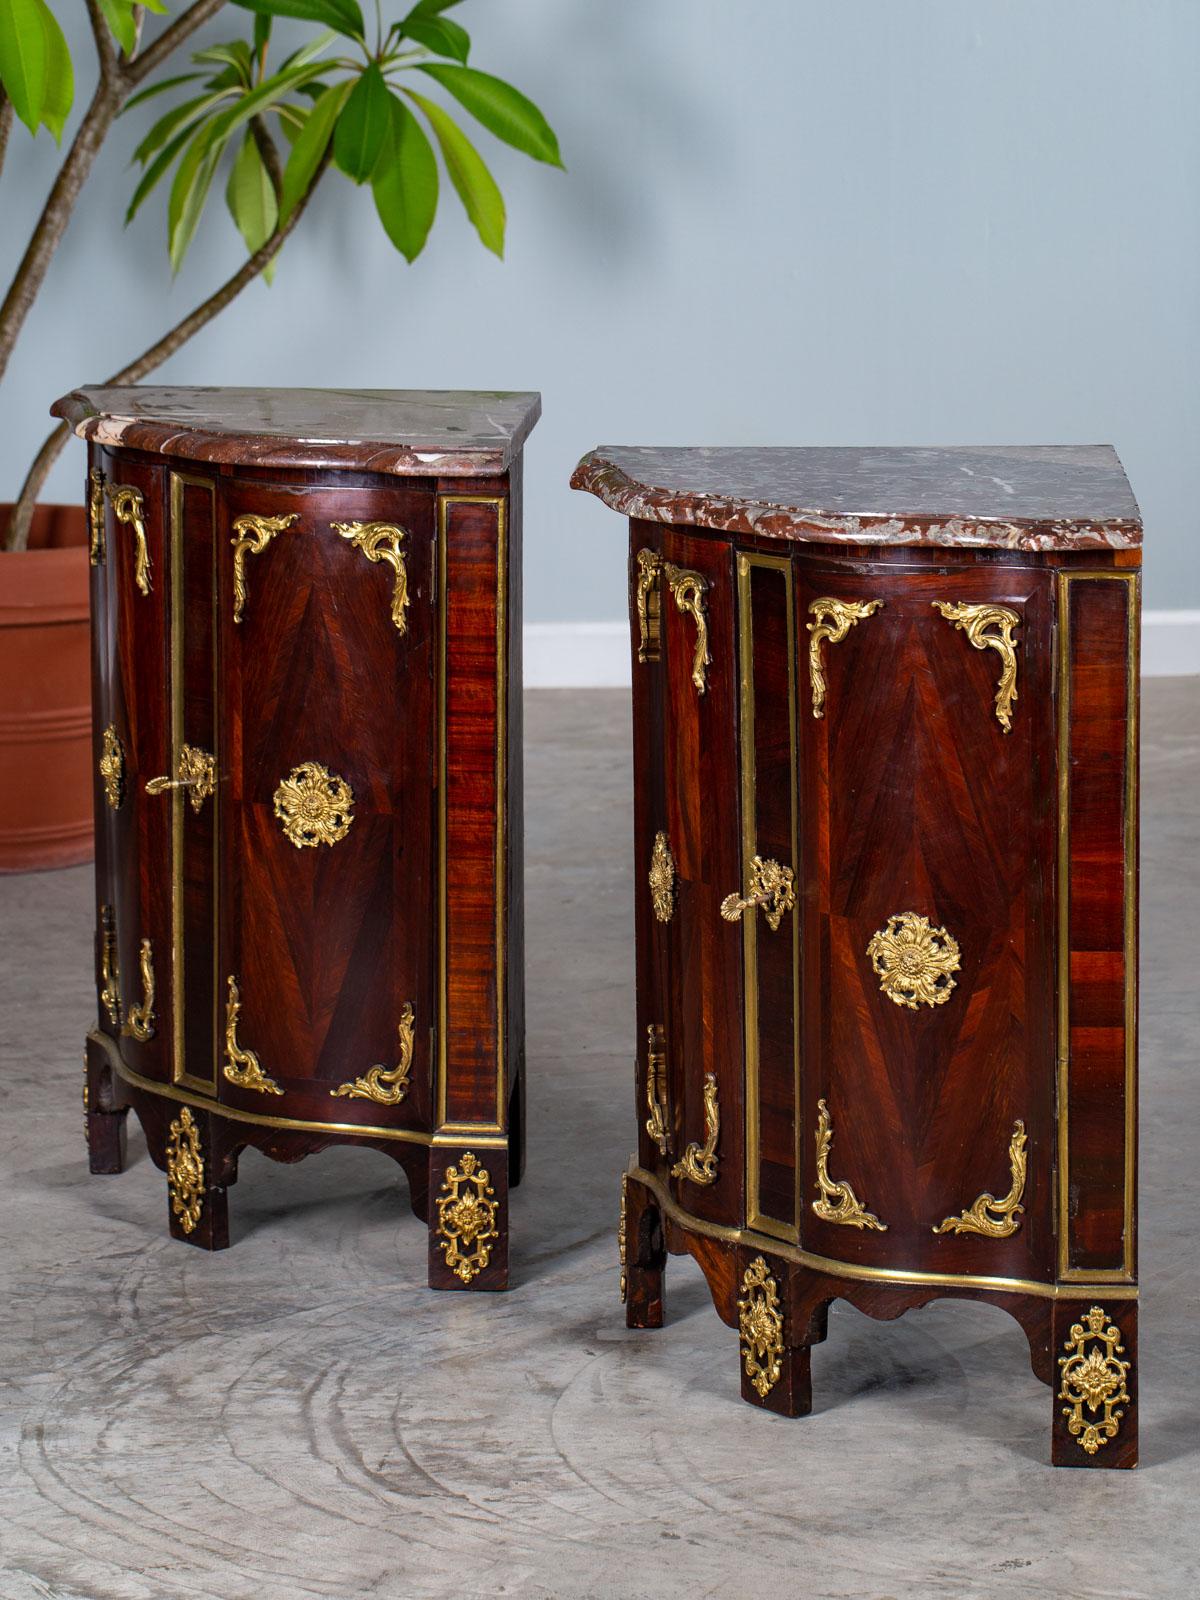 Pair of Antique French Régence Palisander Marble Top Corner Cabinets, circa 1740 For Sale 2